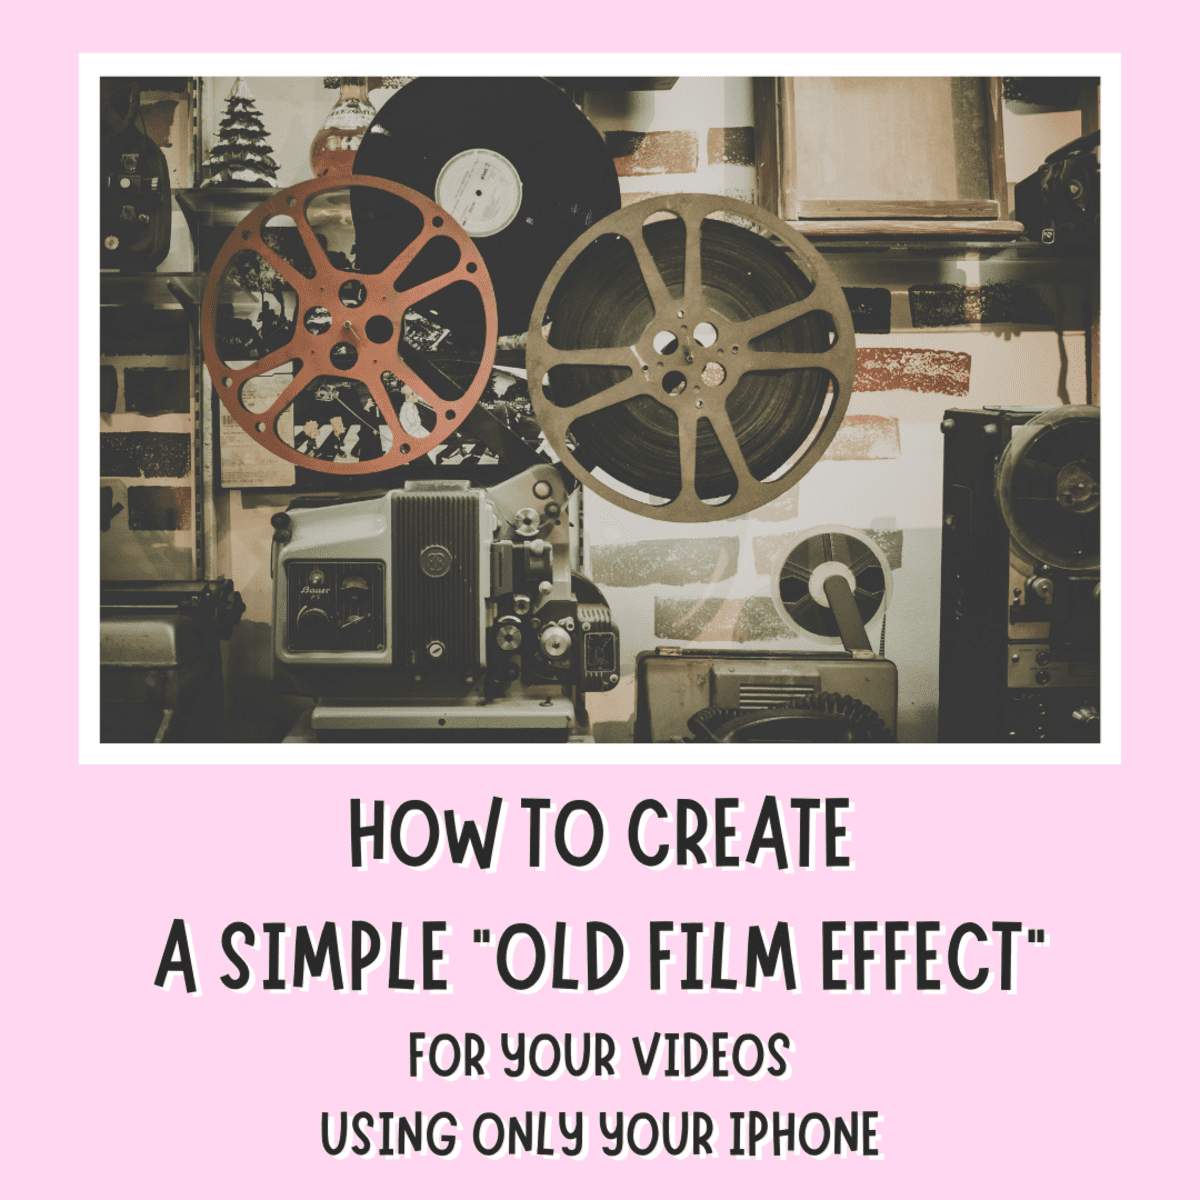 Create a Simple Old Film Effect When Editing Videos on iPhone - TurboFuture